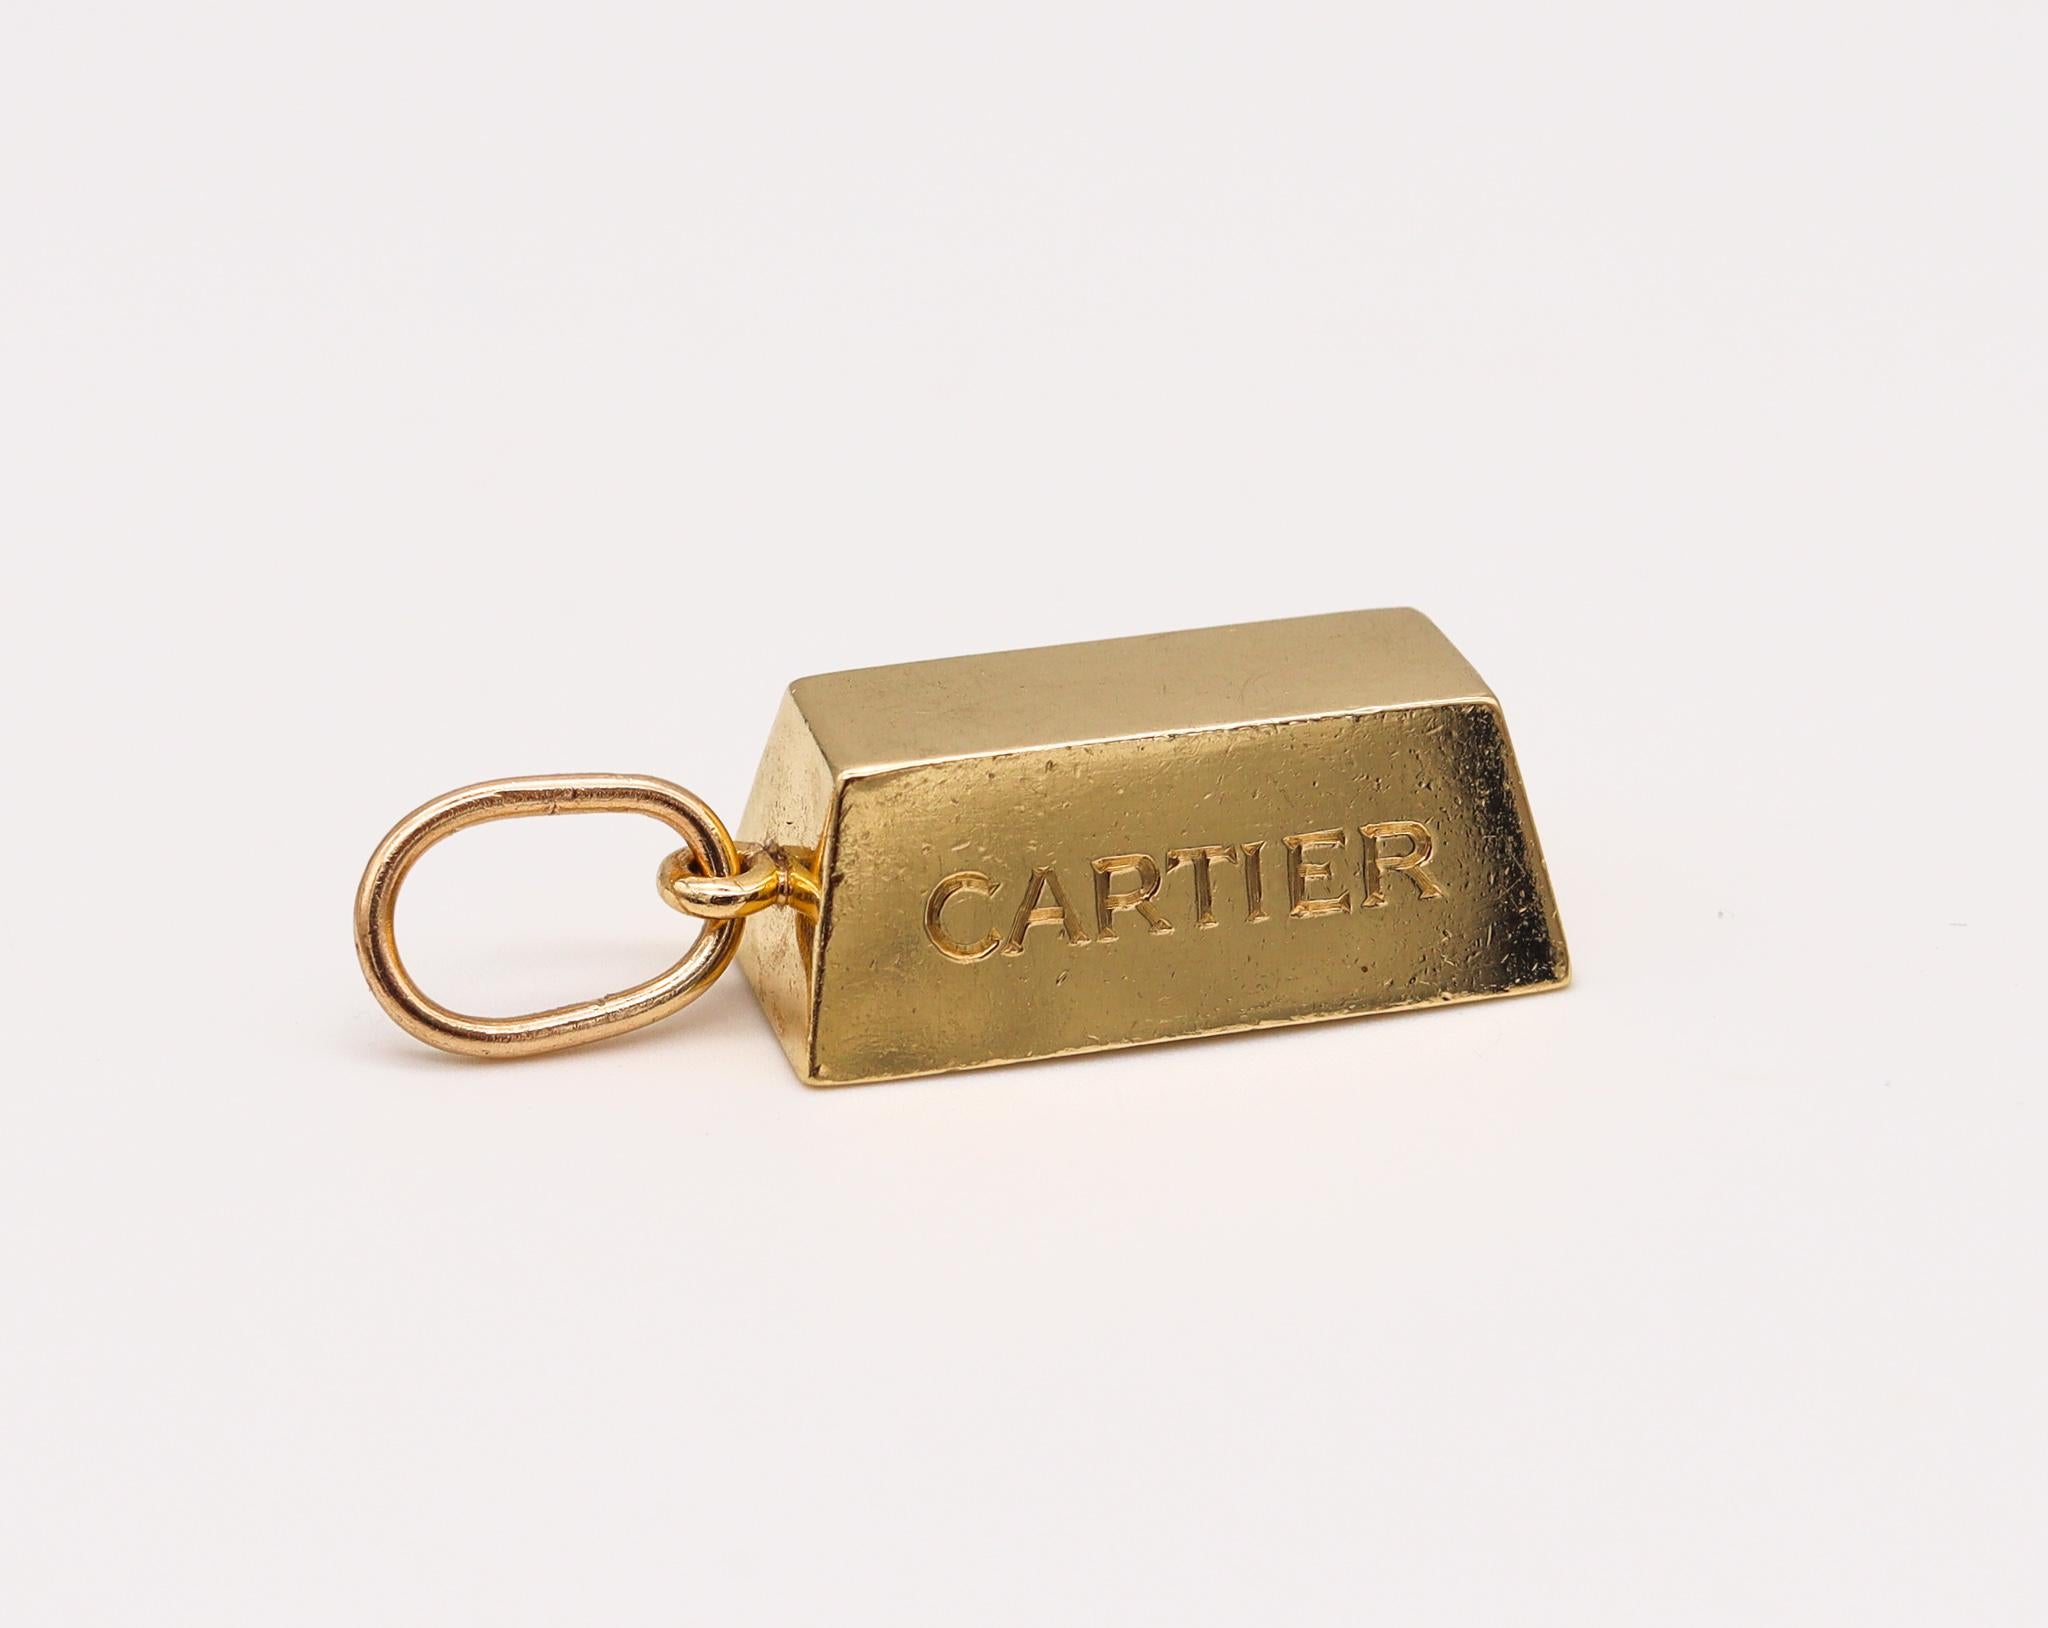 An ingot pendant charm designed by Cartier.

An oversized gold ingot, created by the house of Cartier back in the 1970's. This is an iconic piece from the modernism period crafted in solid yellow gold of 18 karats with high polished finish. Fitted